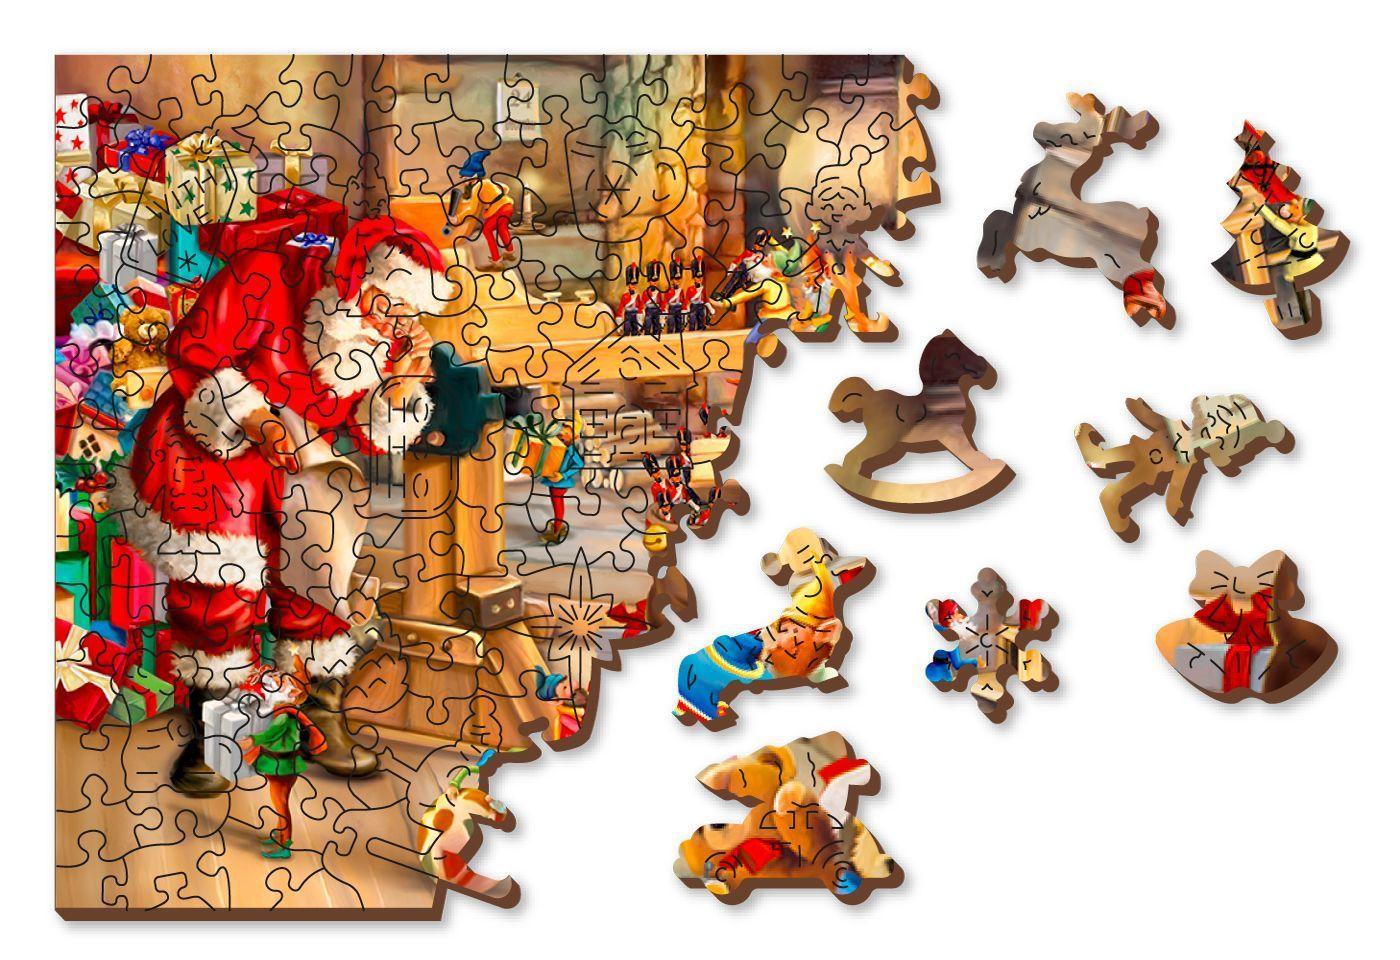 Wooden Puzzle with Figurines - Santa's Workshop